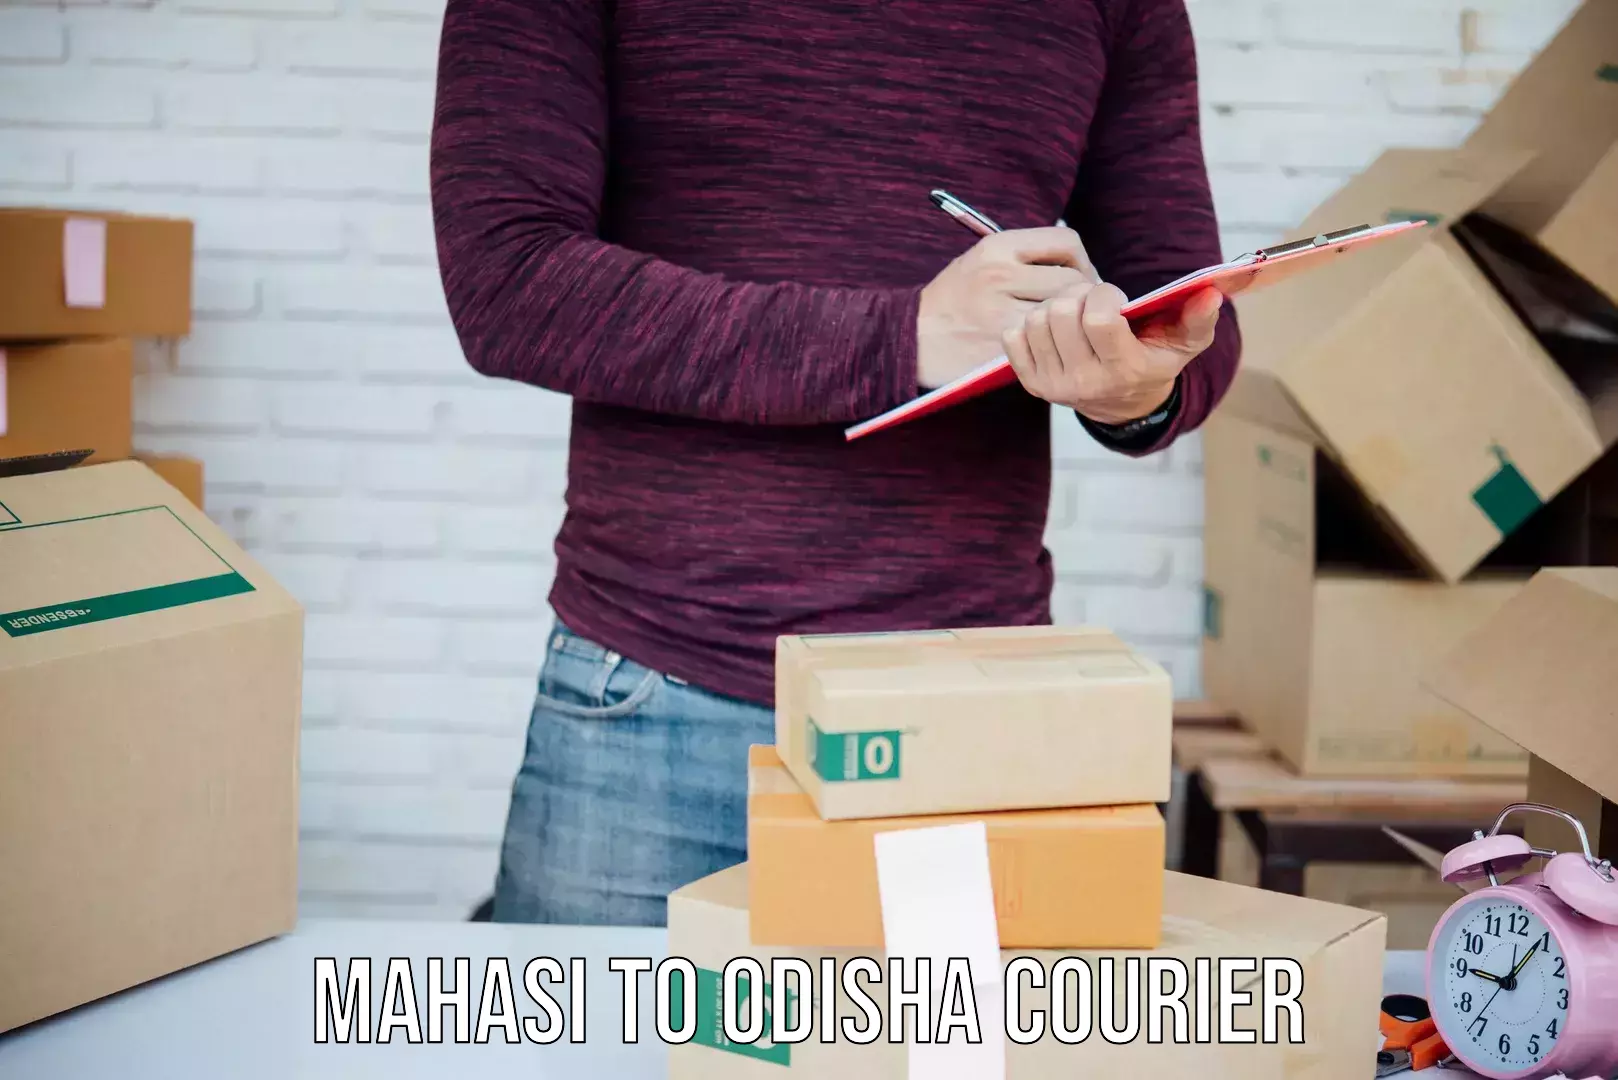 Overnight delivery services Mahasi to Odisha